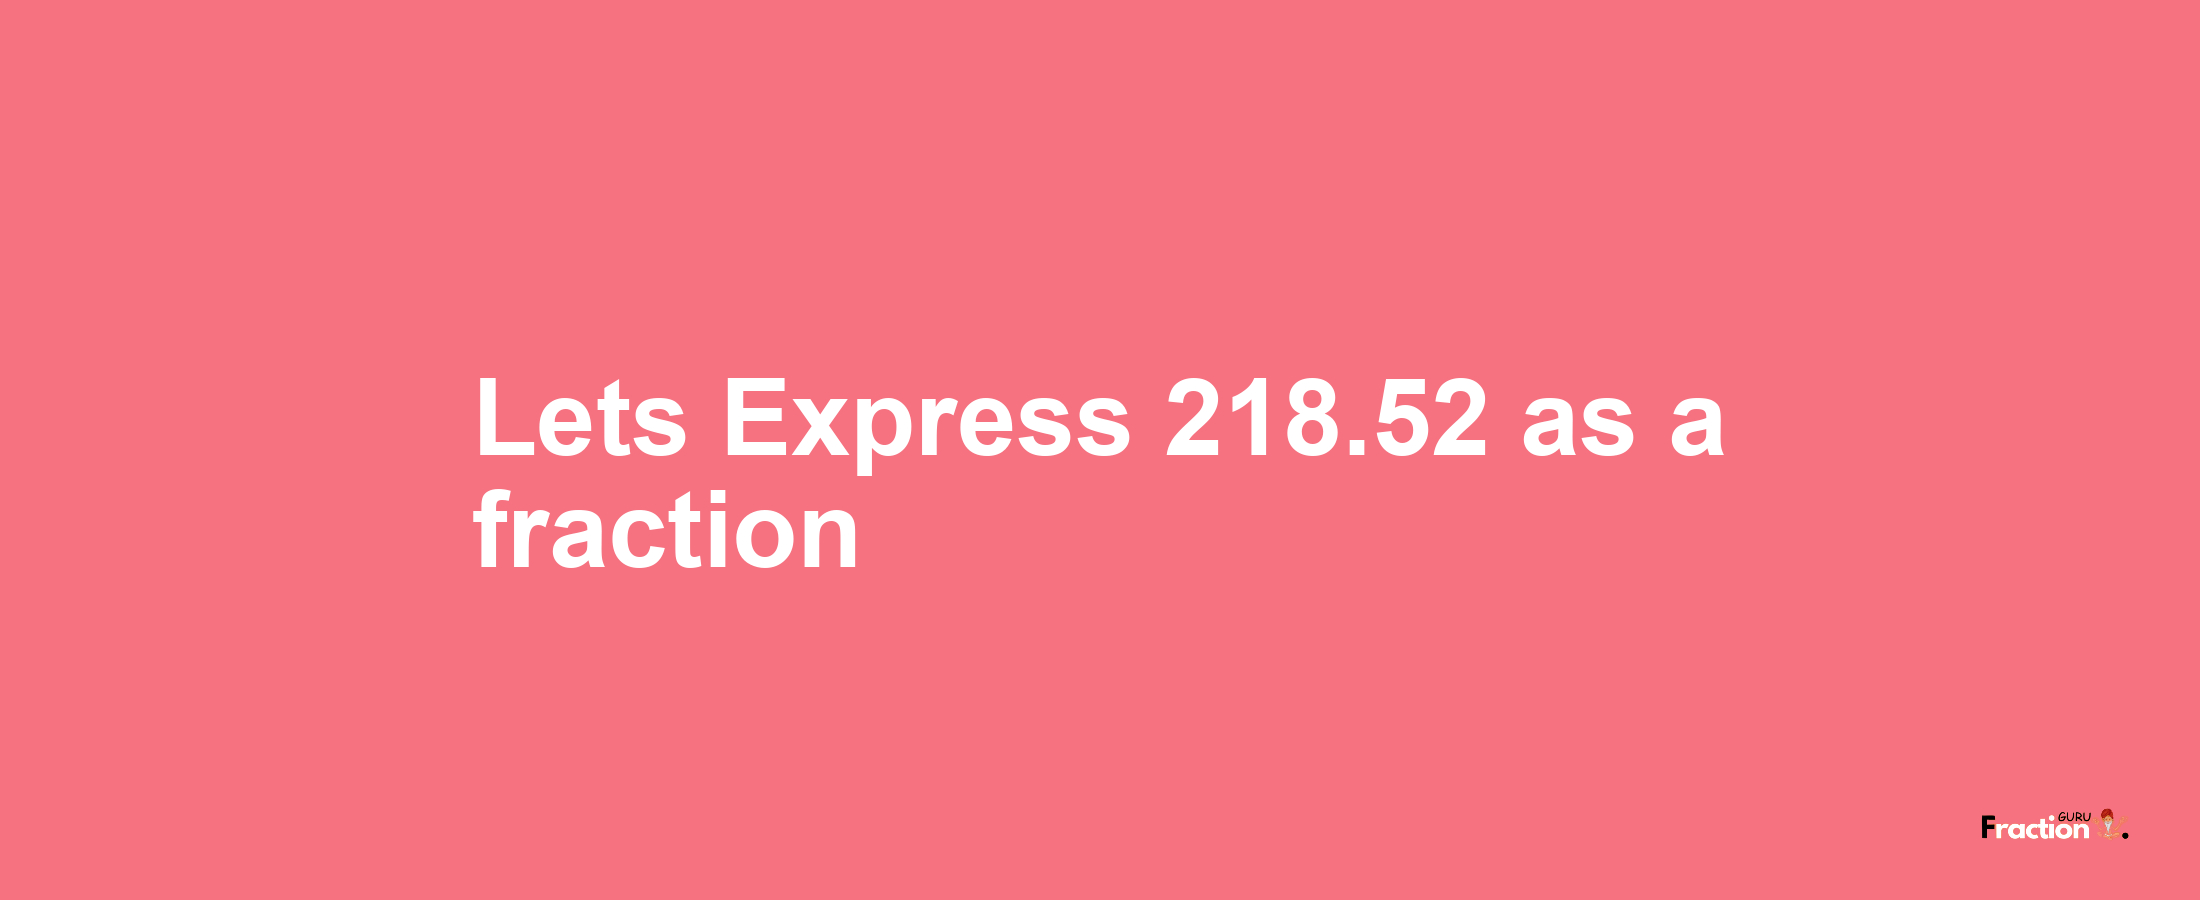 Lets Express 218.52 as afraction